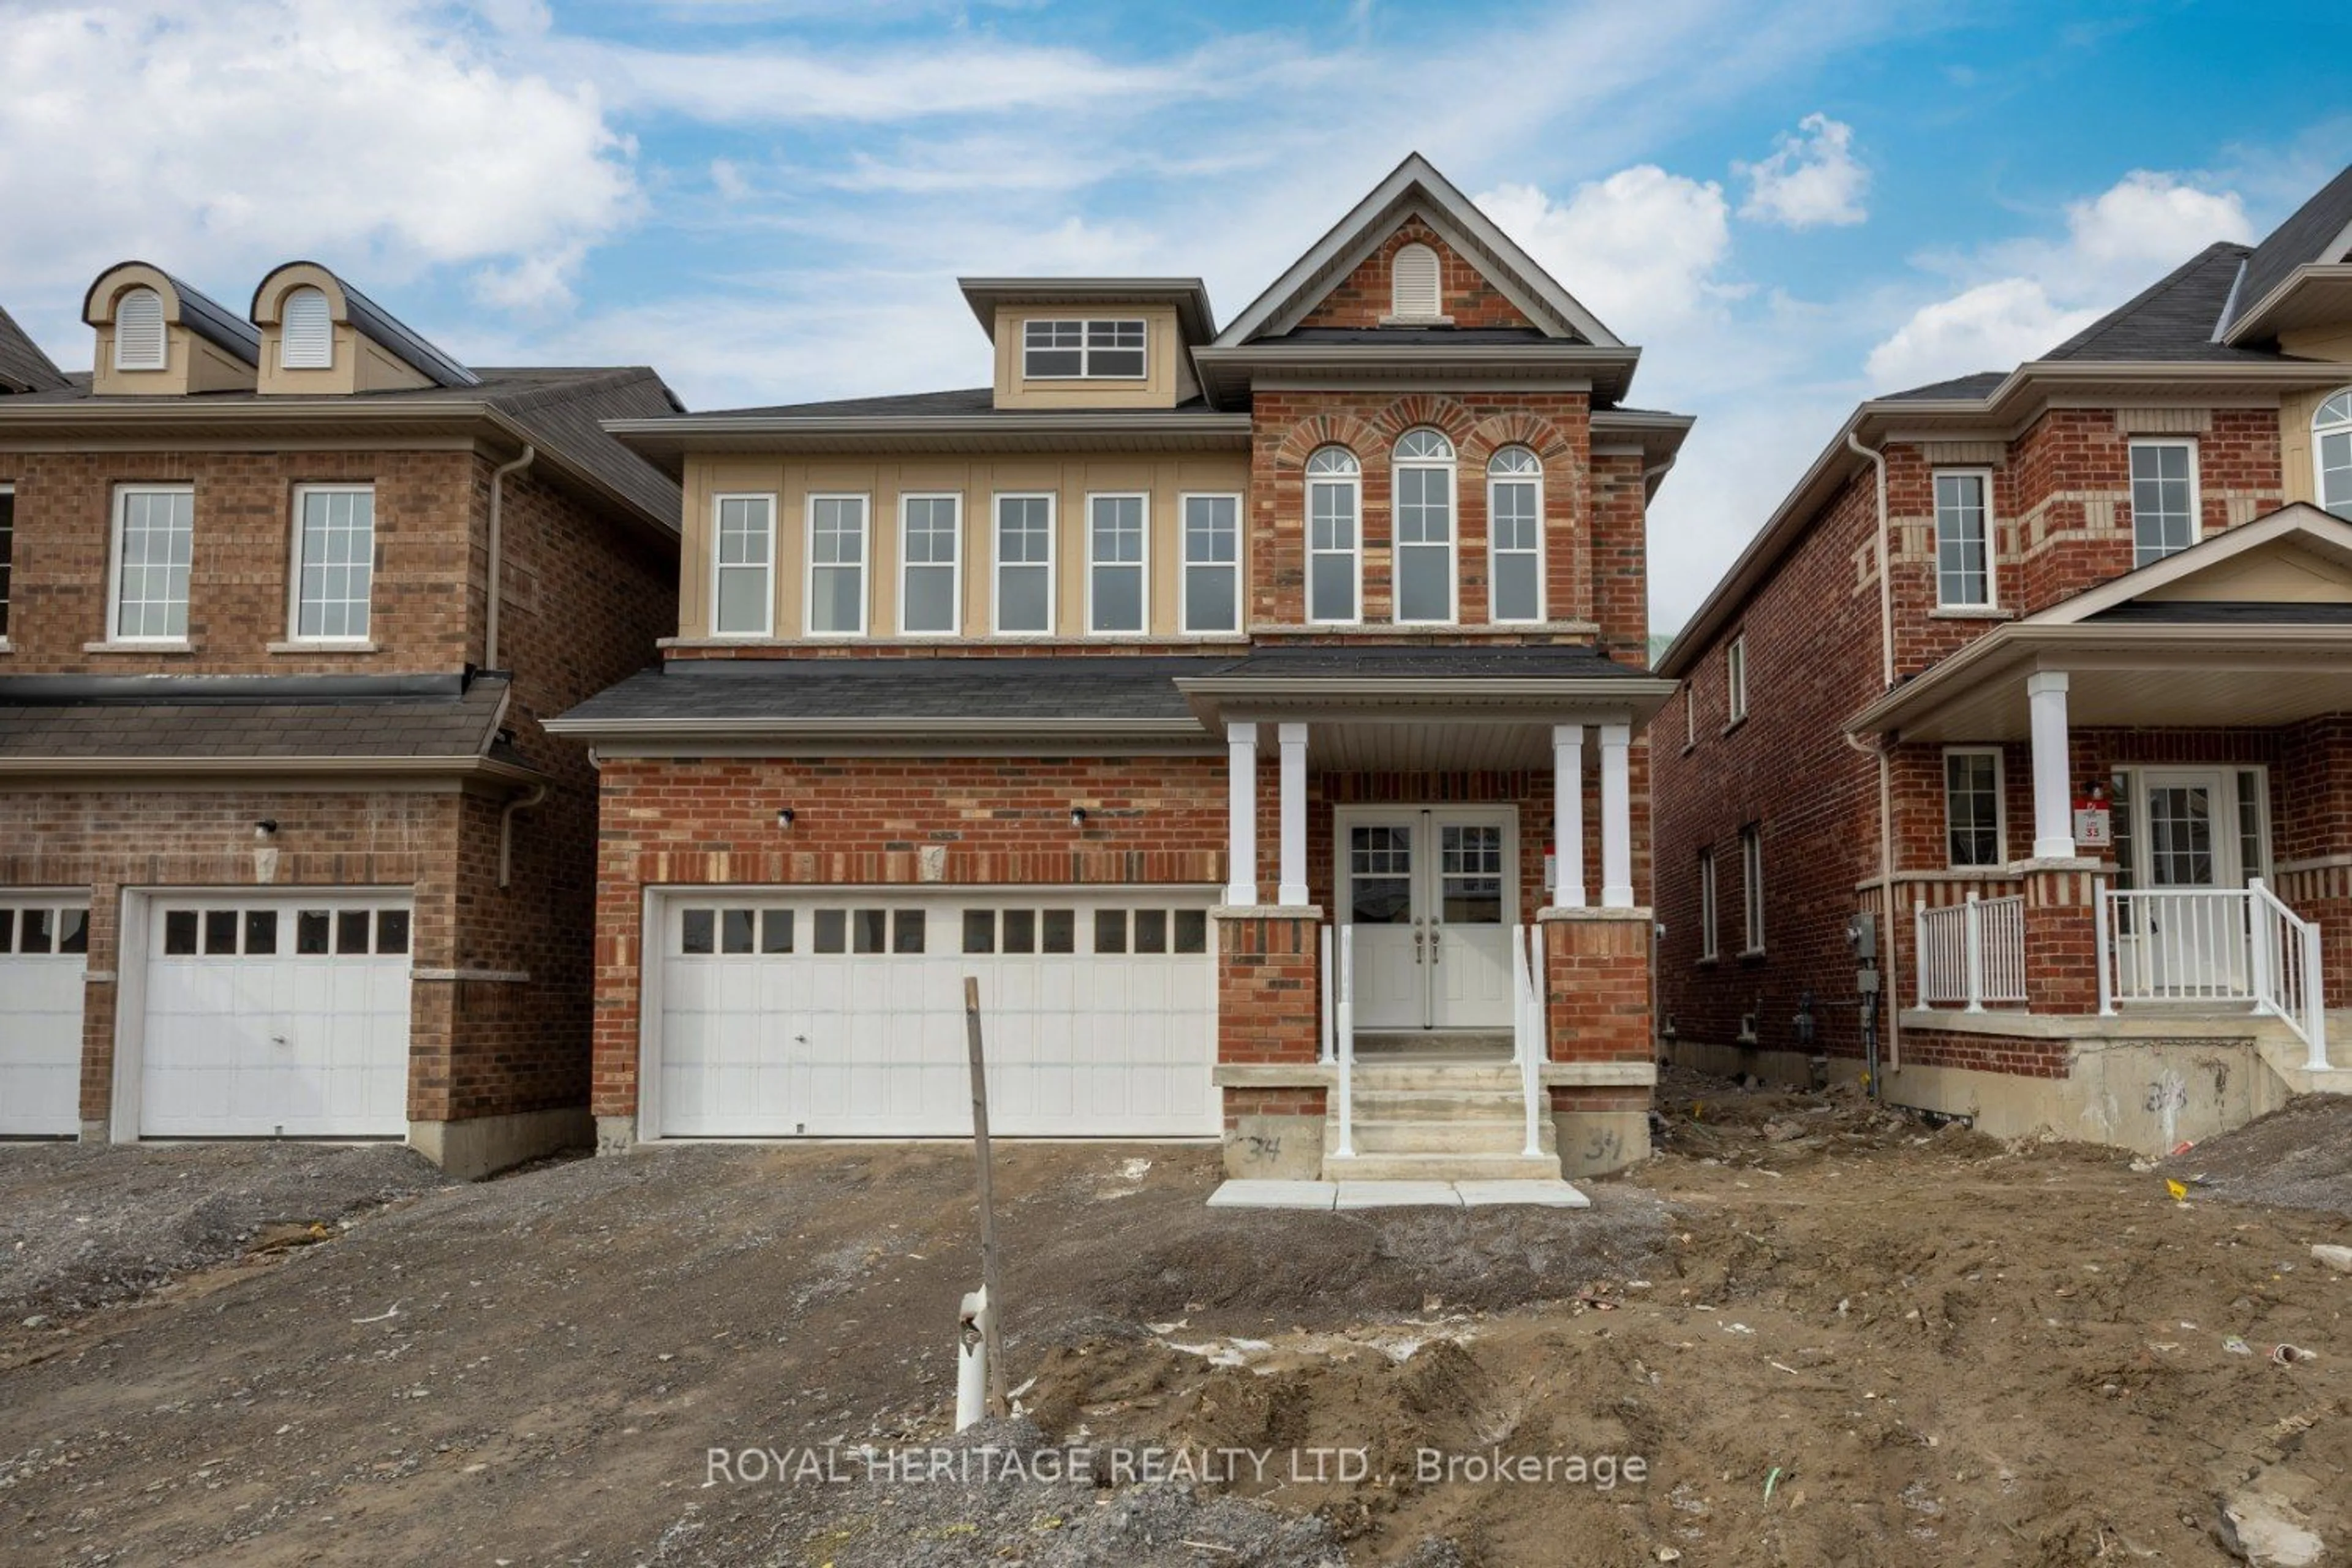 Home with brick exterior material for 1186 Drinkle Cres, Oshawa Ontario L1K 3G8